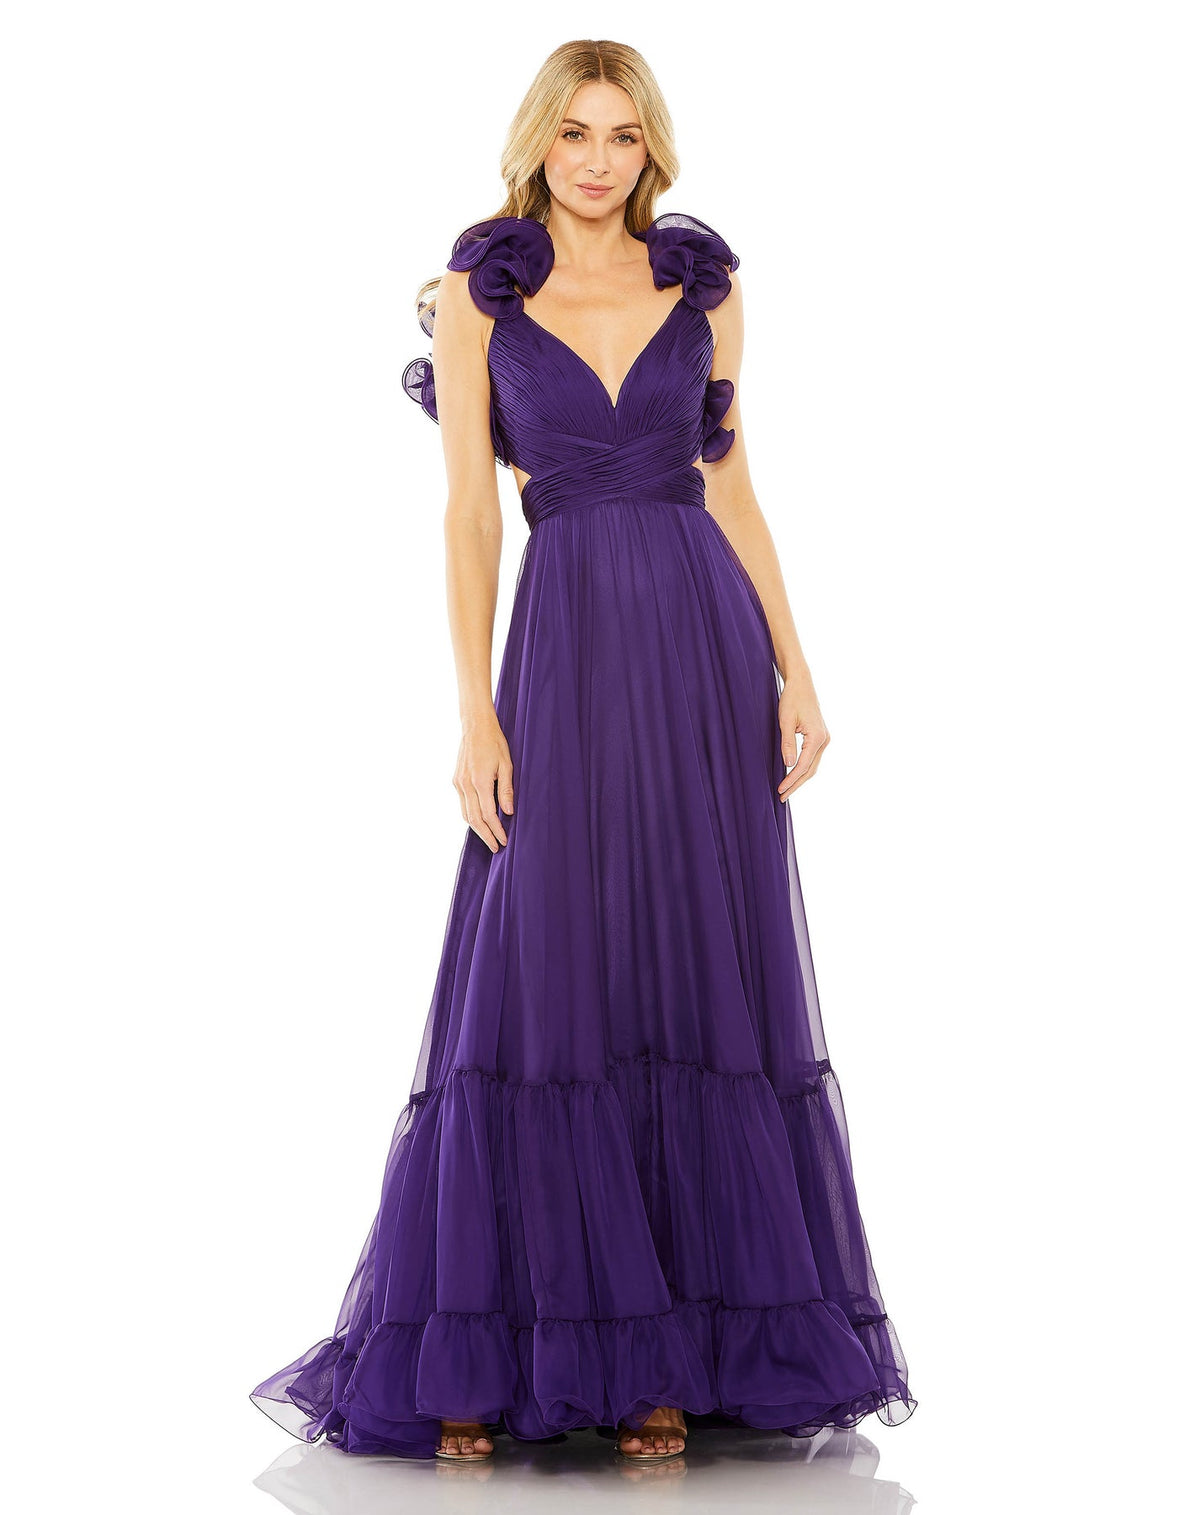 Ruffle tiered floral cut-out chiffon gown - Cobalt